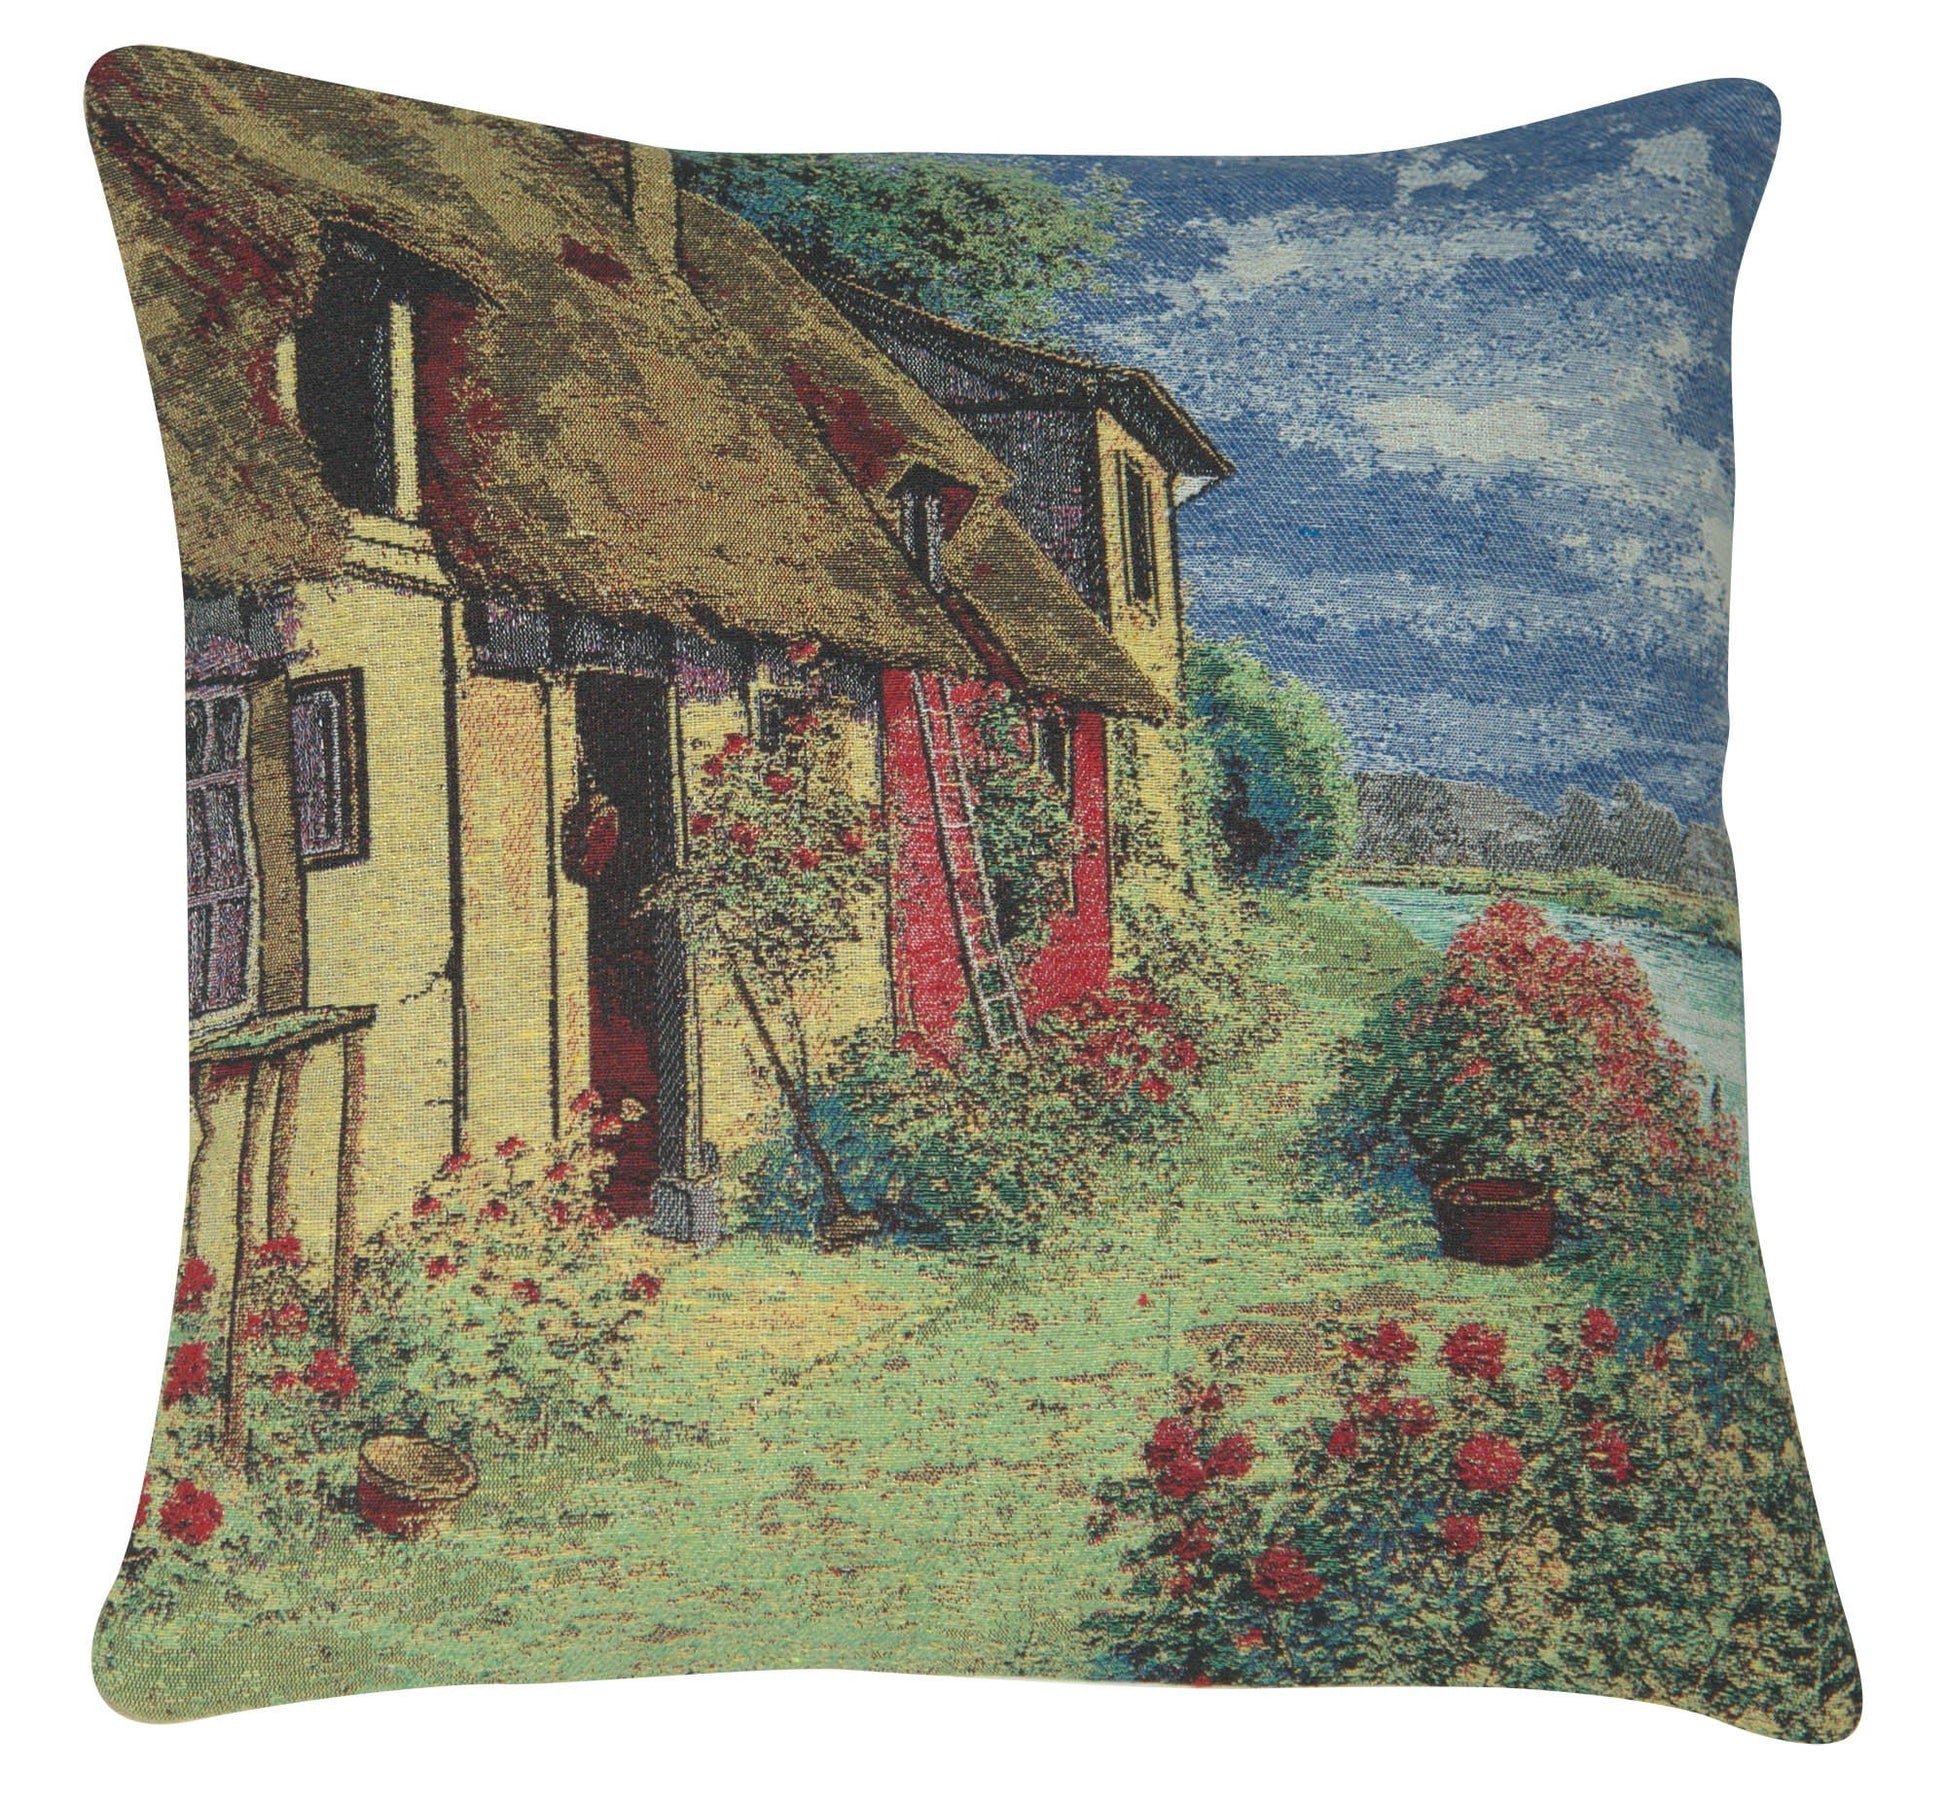 Tranquil Cottage Decorative Pillow Cushion Cover - RoseStraya.com